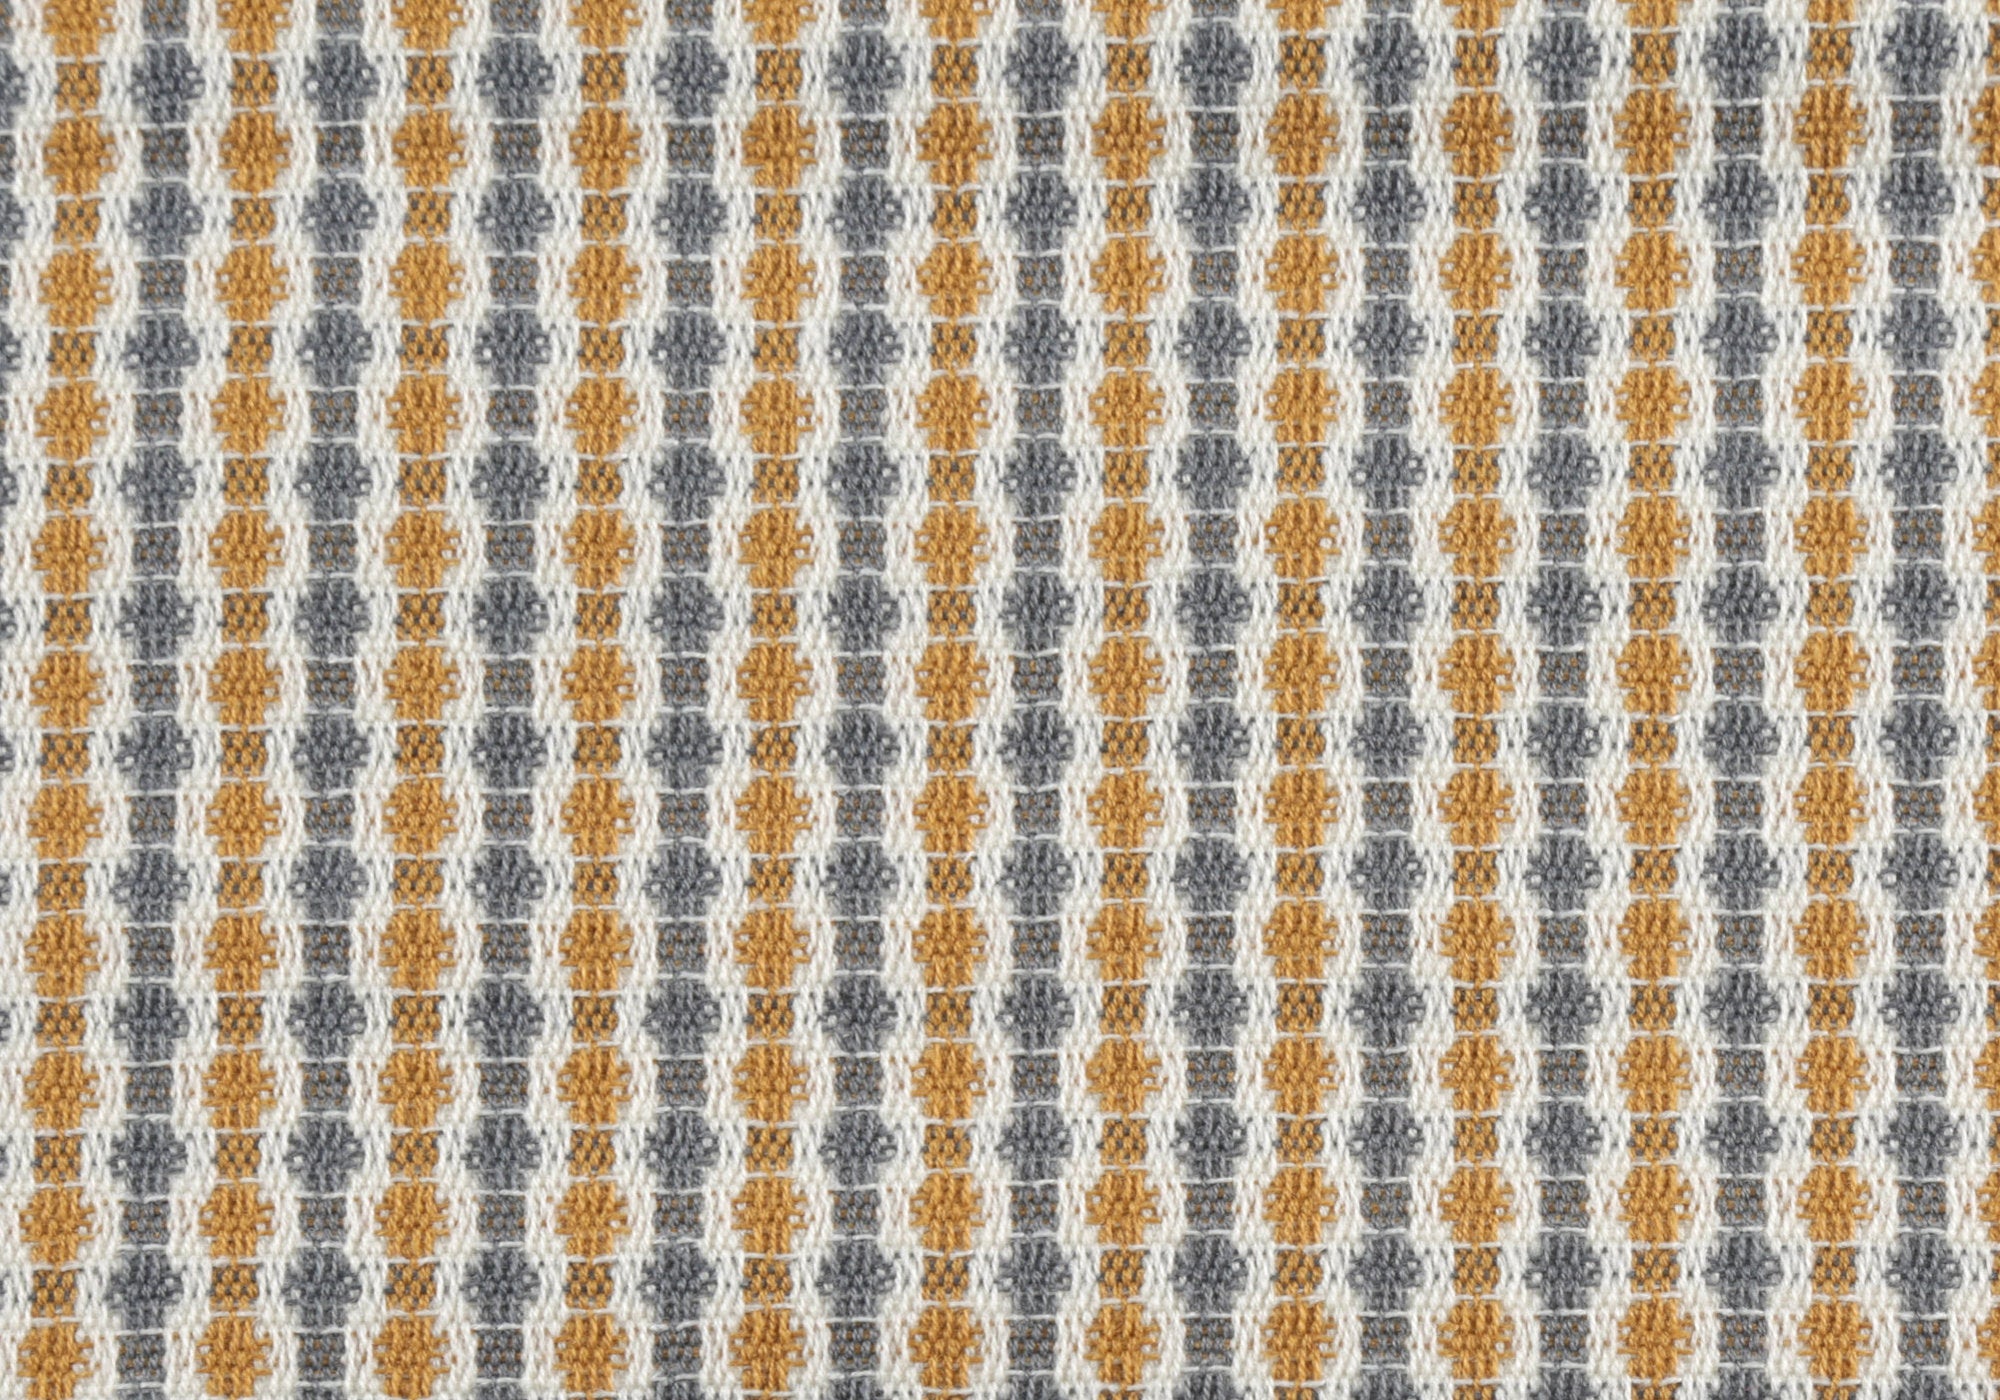 Accent Chair - Gold / Grey Abstract Dot Fabric